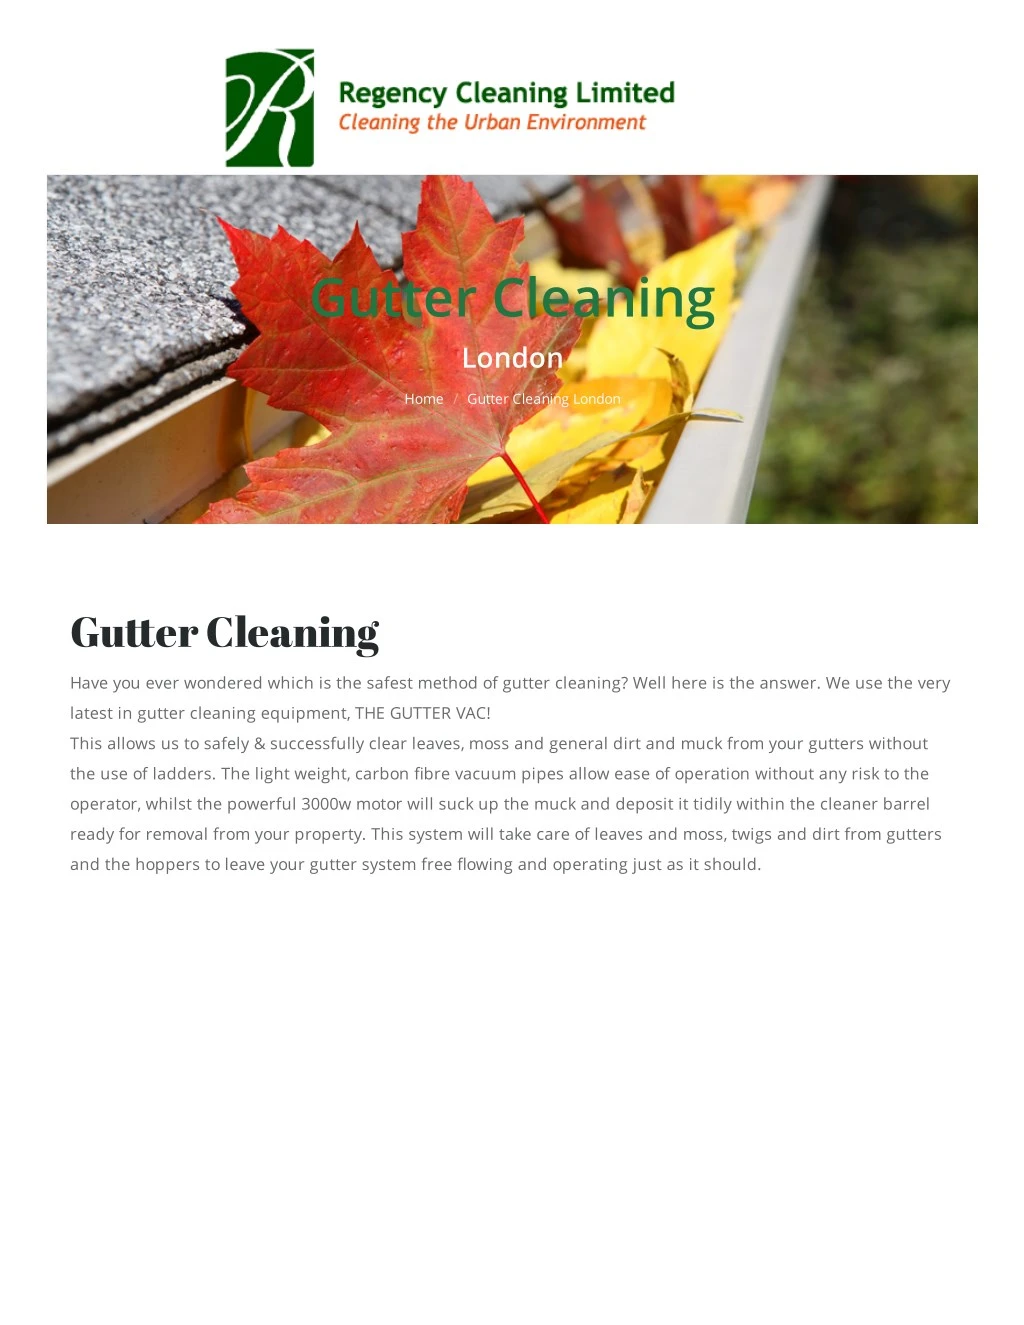 gutter cleaning london